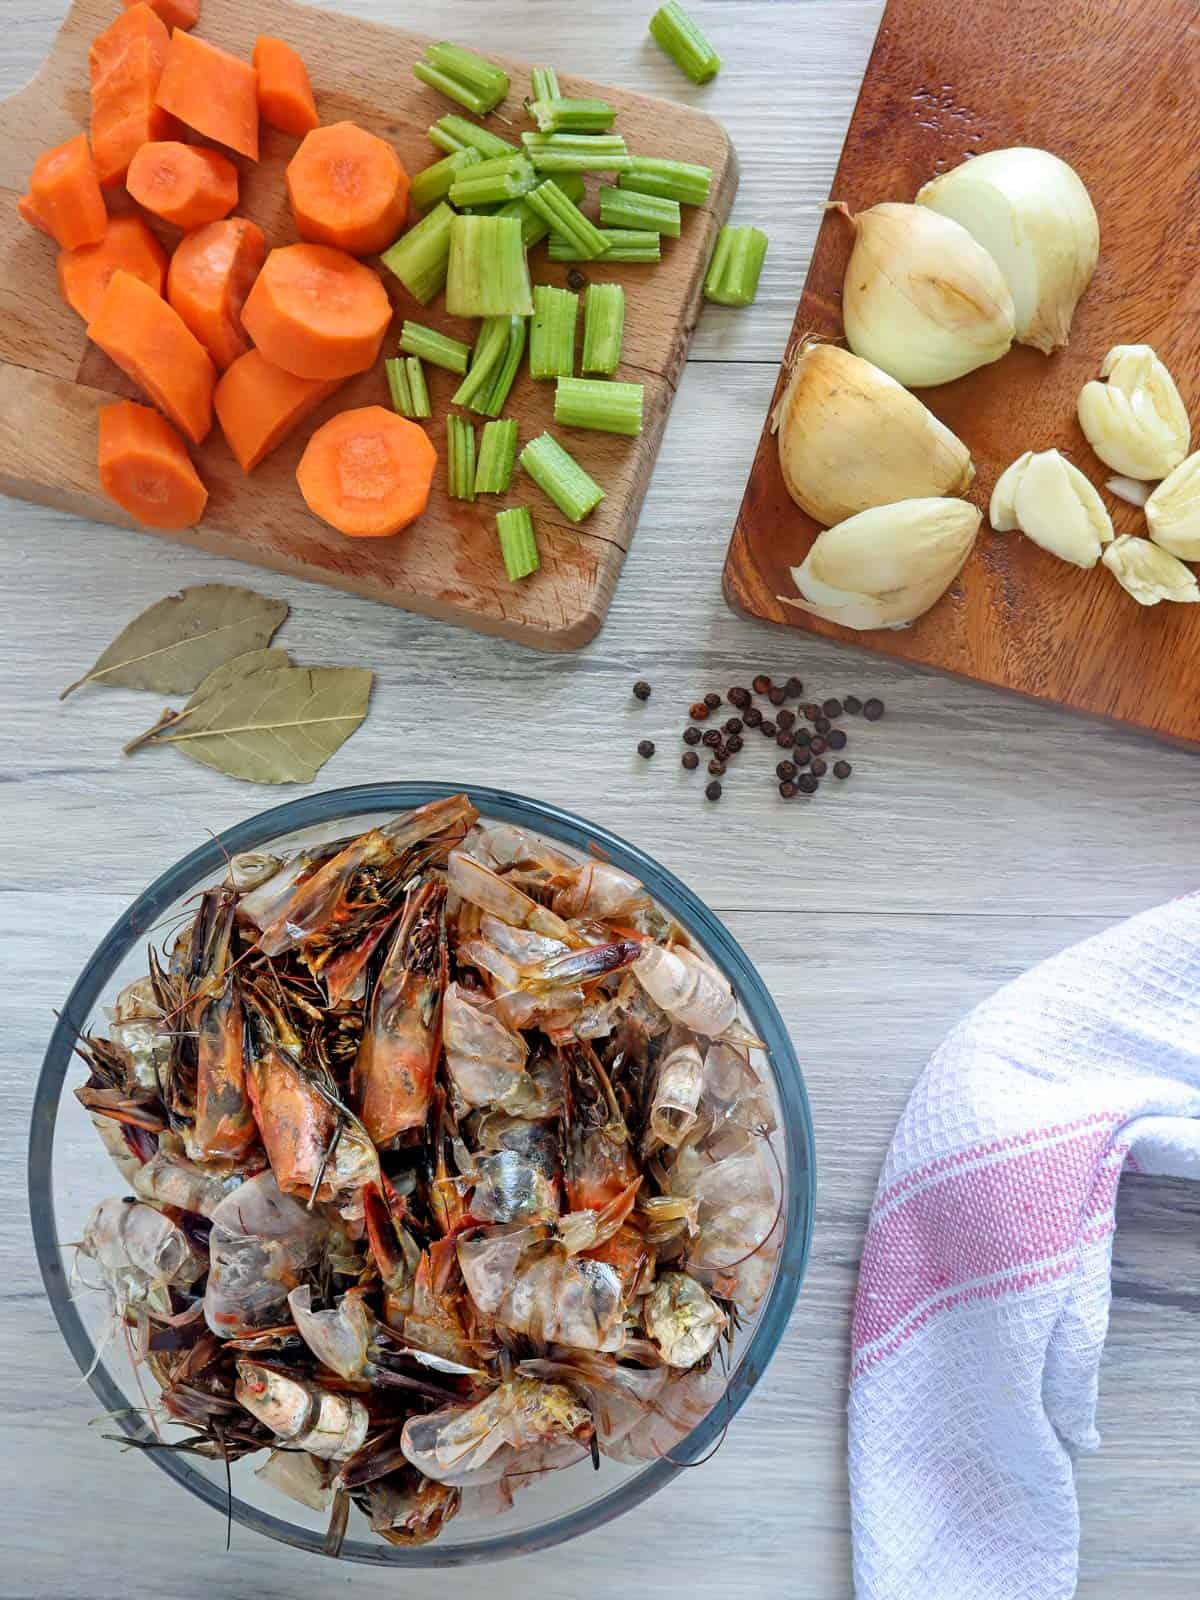 Seafood Stock Recipe - How to Make Crab Stock